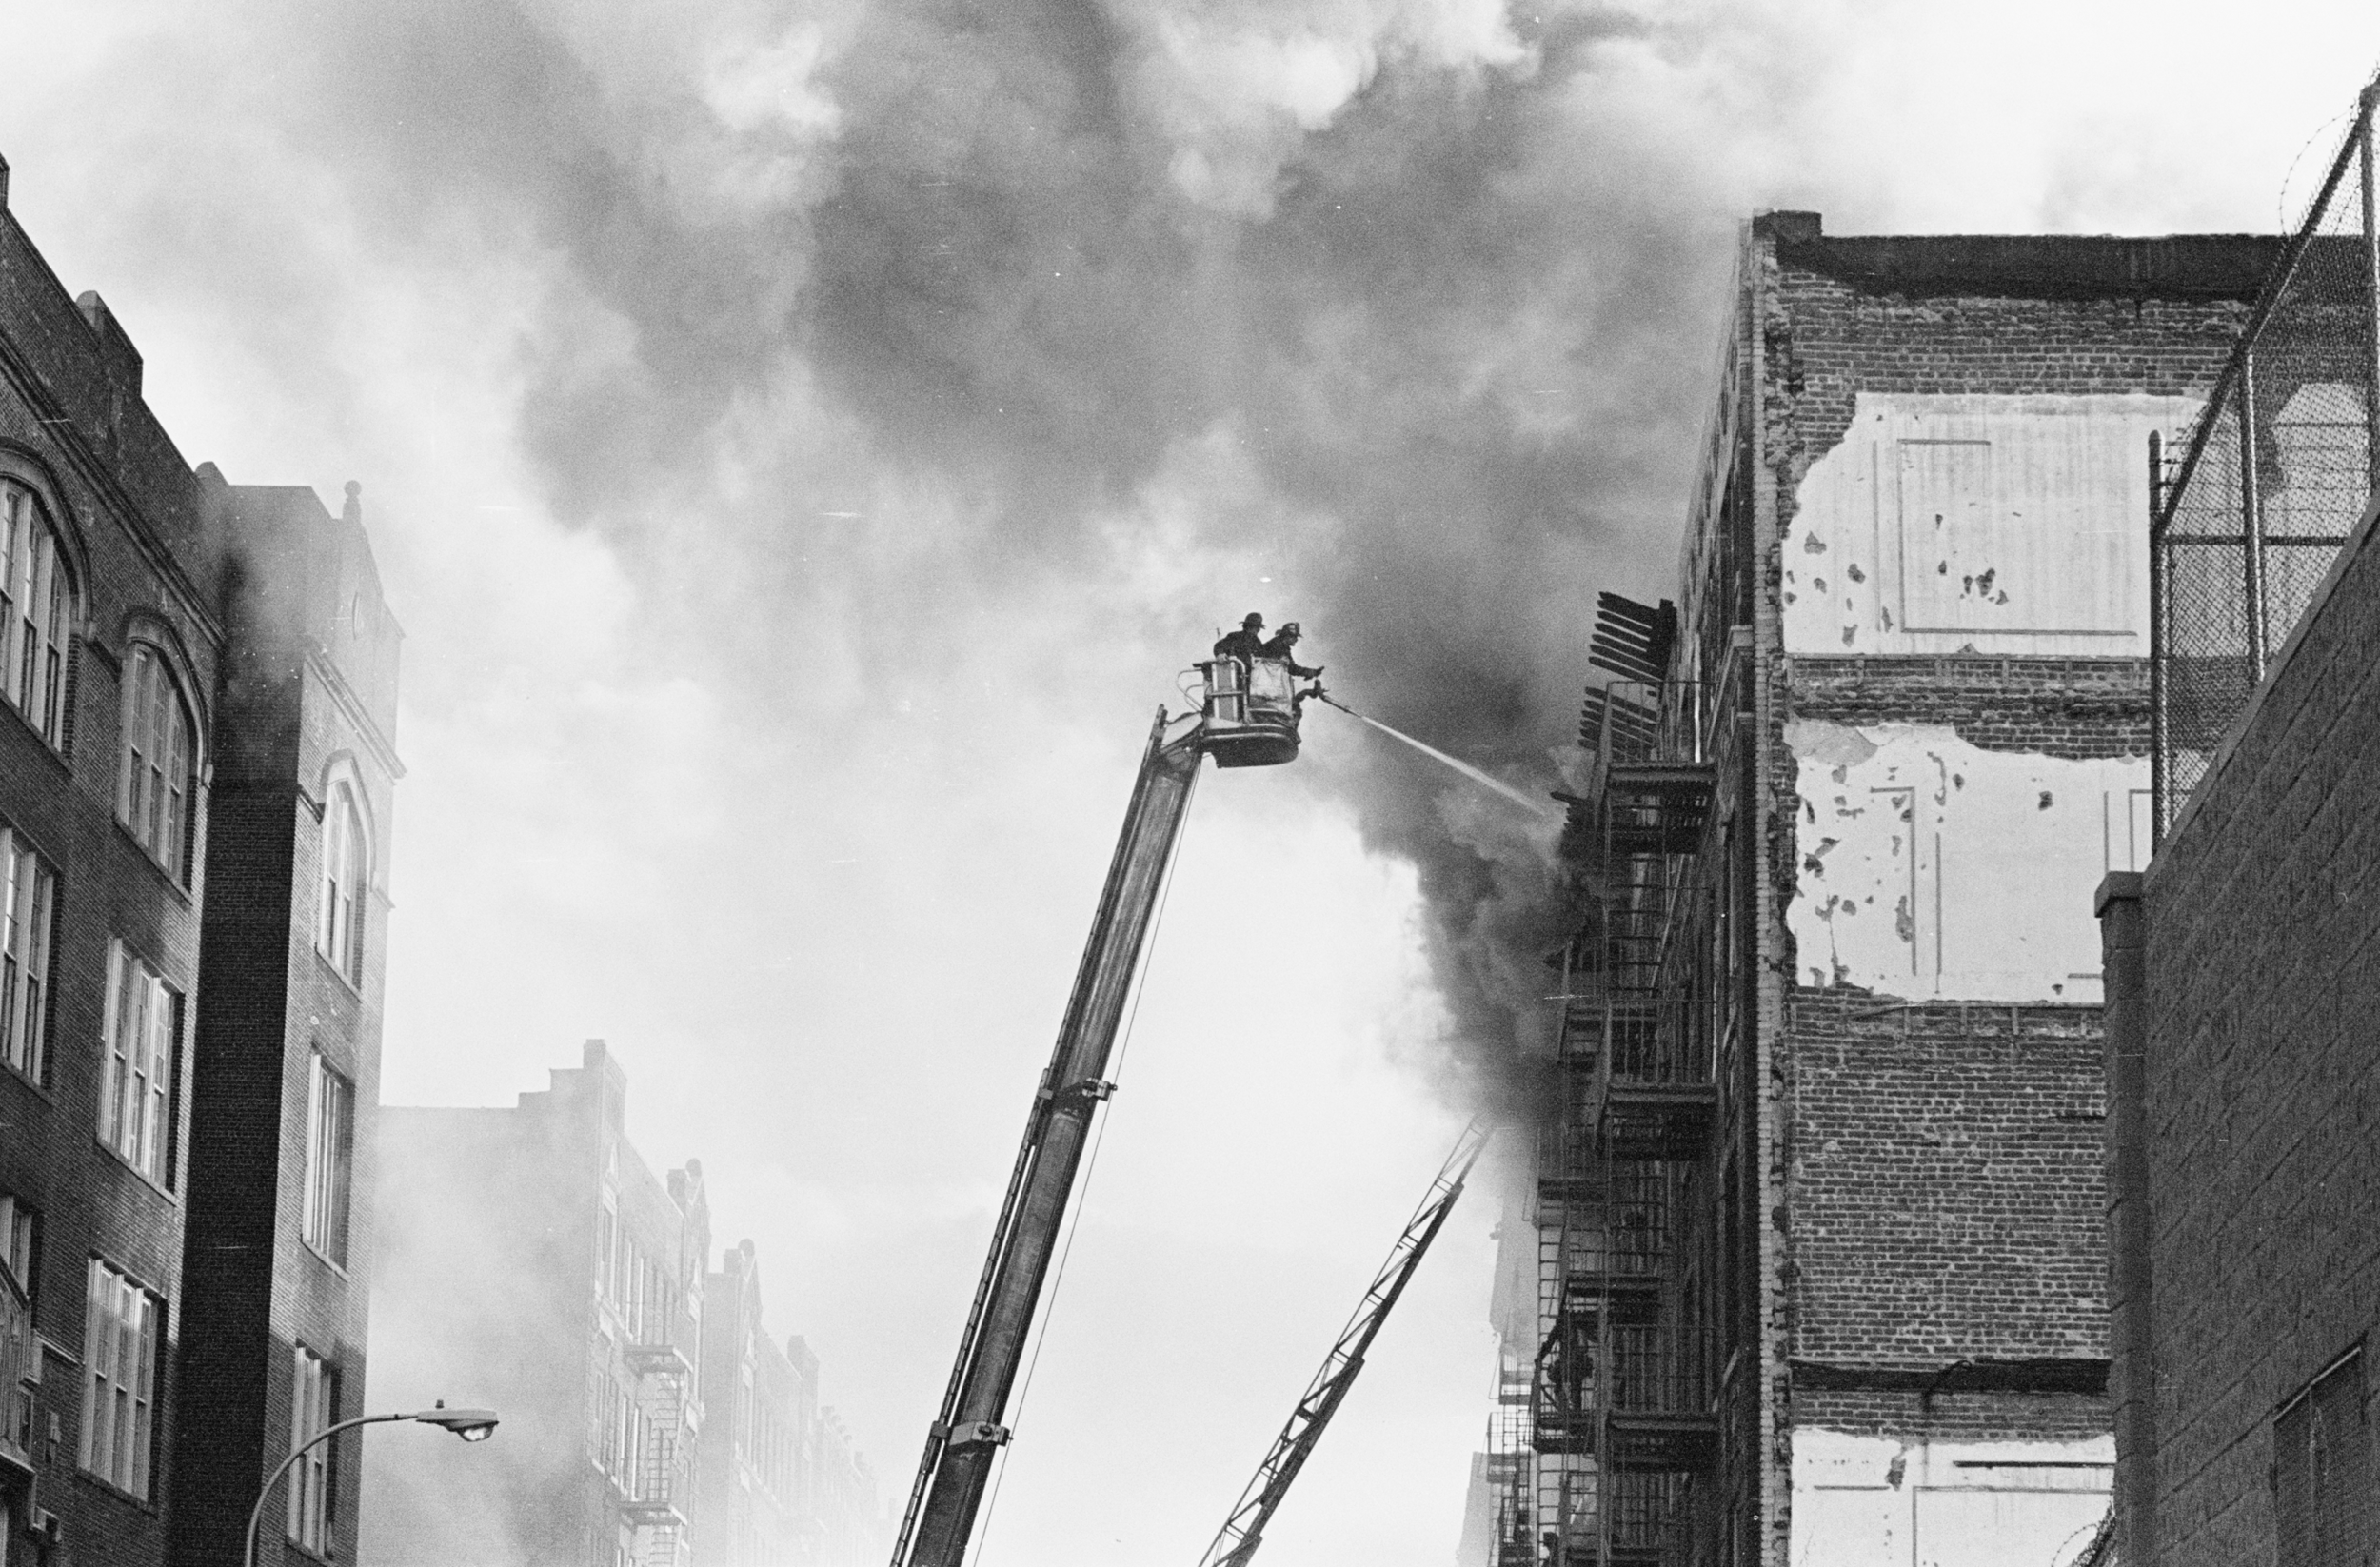 Decade of Fire, The South Bronx Fires, Independent Lens